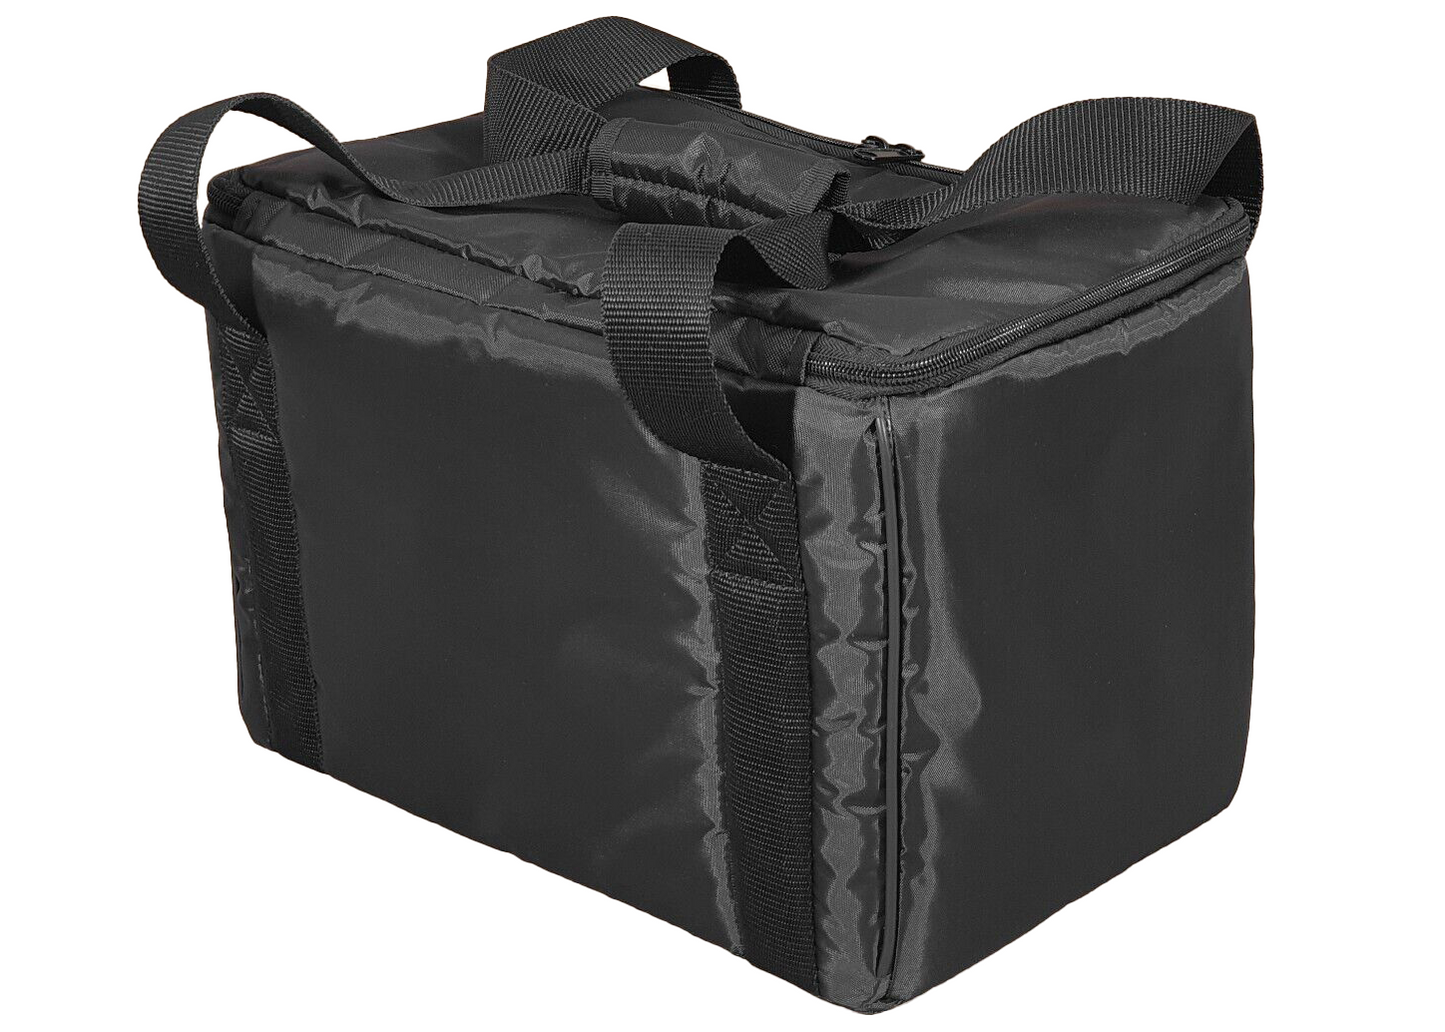 Copy of Custom dual-padded GIG BAG / Soft Carrying Case for Guitar Amp (18.26" x 9.86" x 12.04")